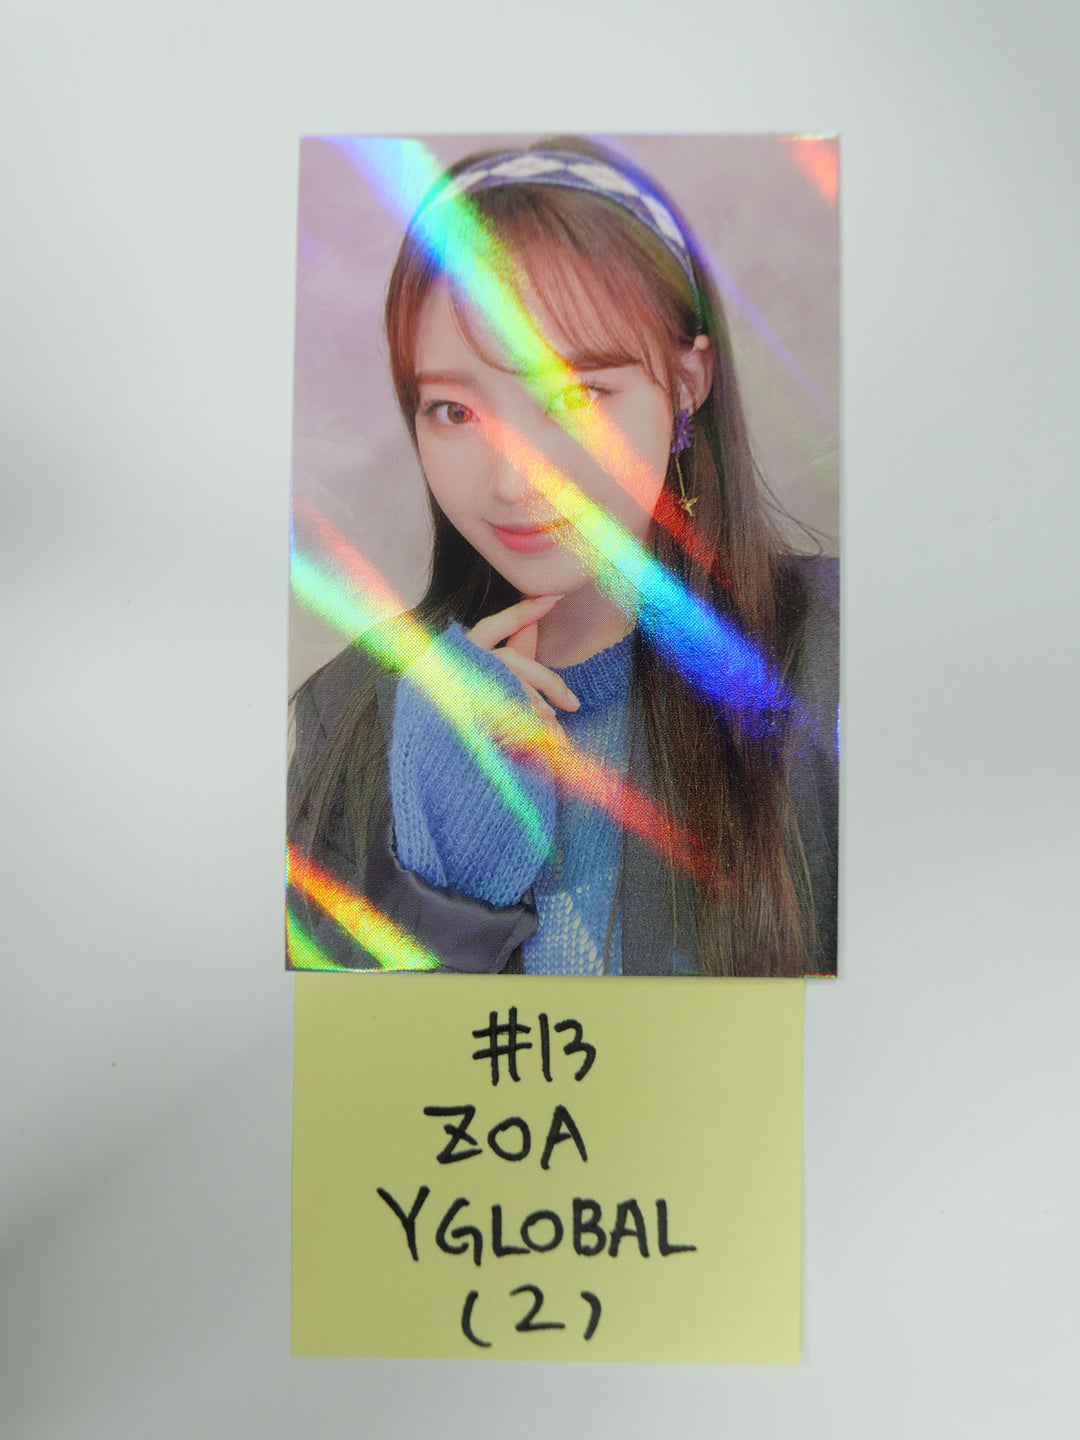 Weeekly "We Play" 3rd mini - Yglobal Pre-order Event Hologram Photocard